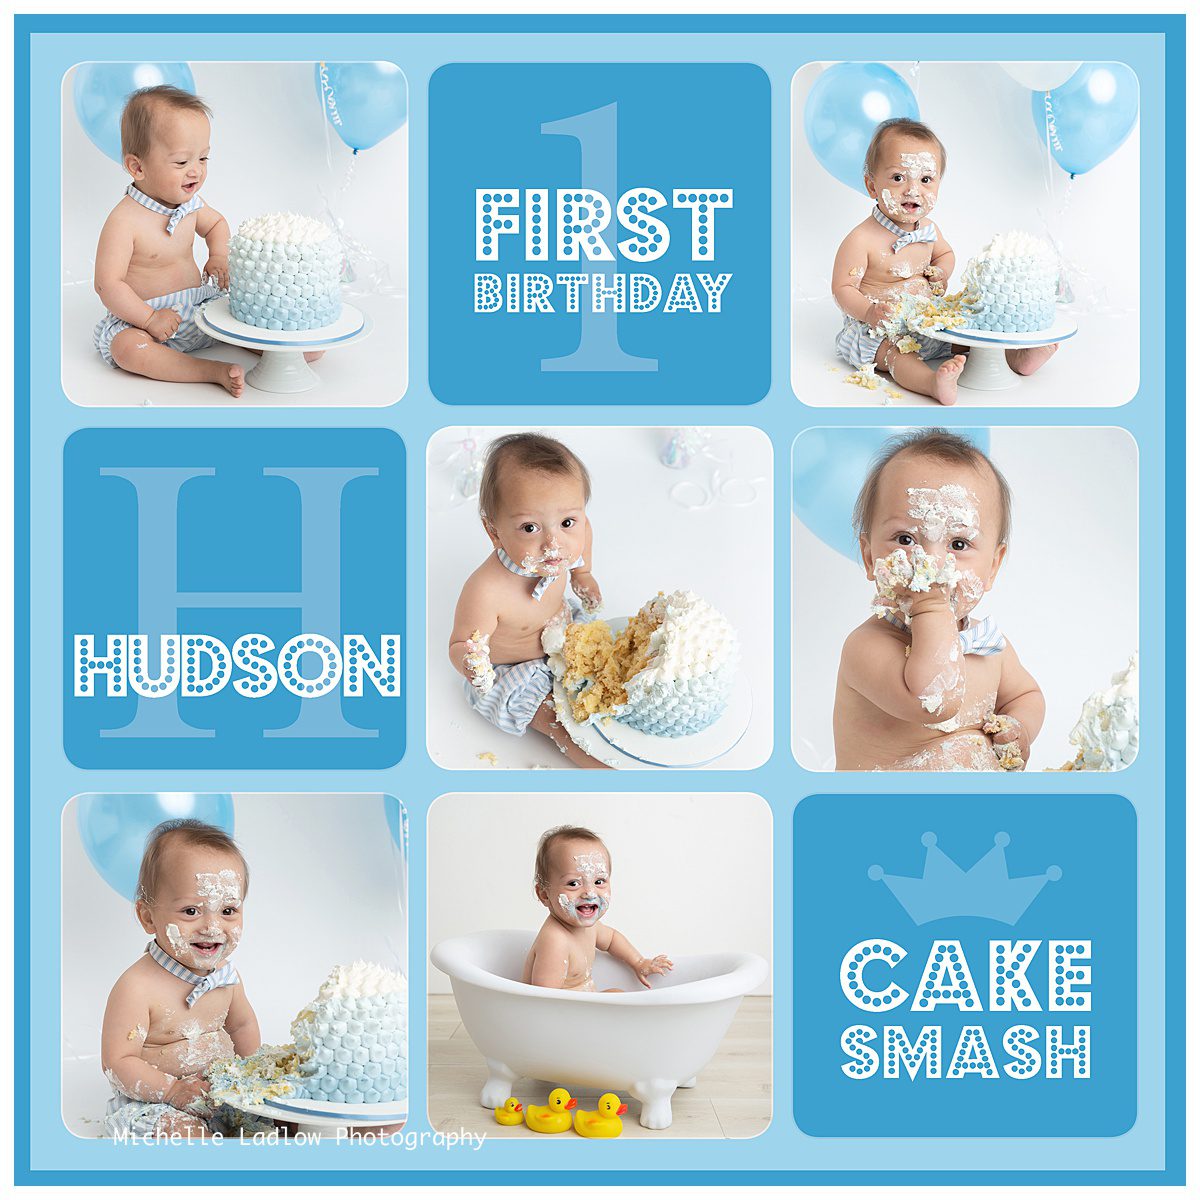 Cake Smash Template,12x12,Storyboard,Template,Photographer Template,Design Templates,Storyboards,Cake Smash template,Storyboard template,Facebook Timeline Cover Designs,Templates for Photographers,